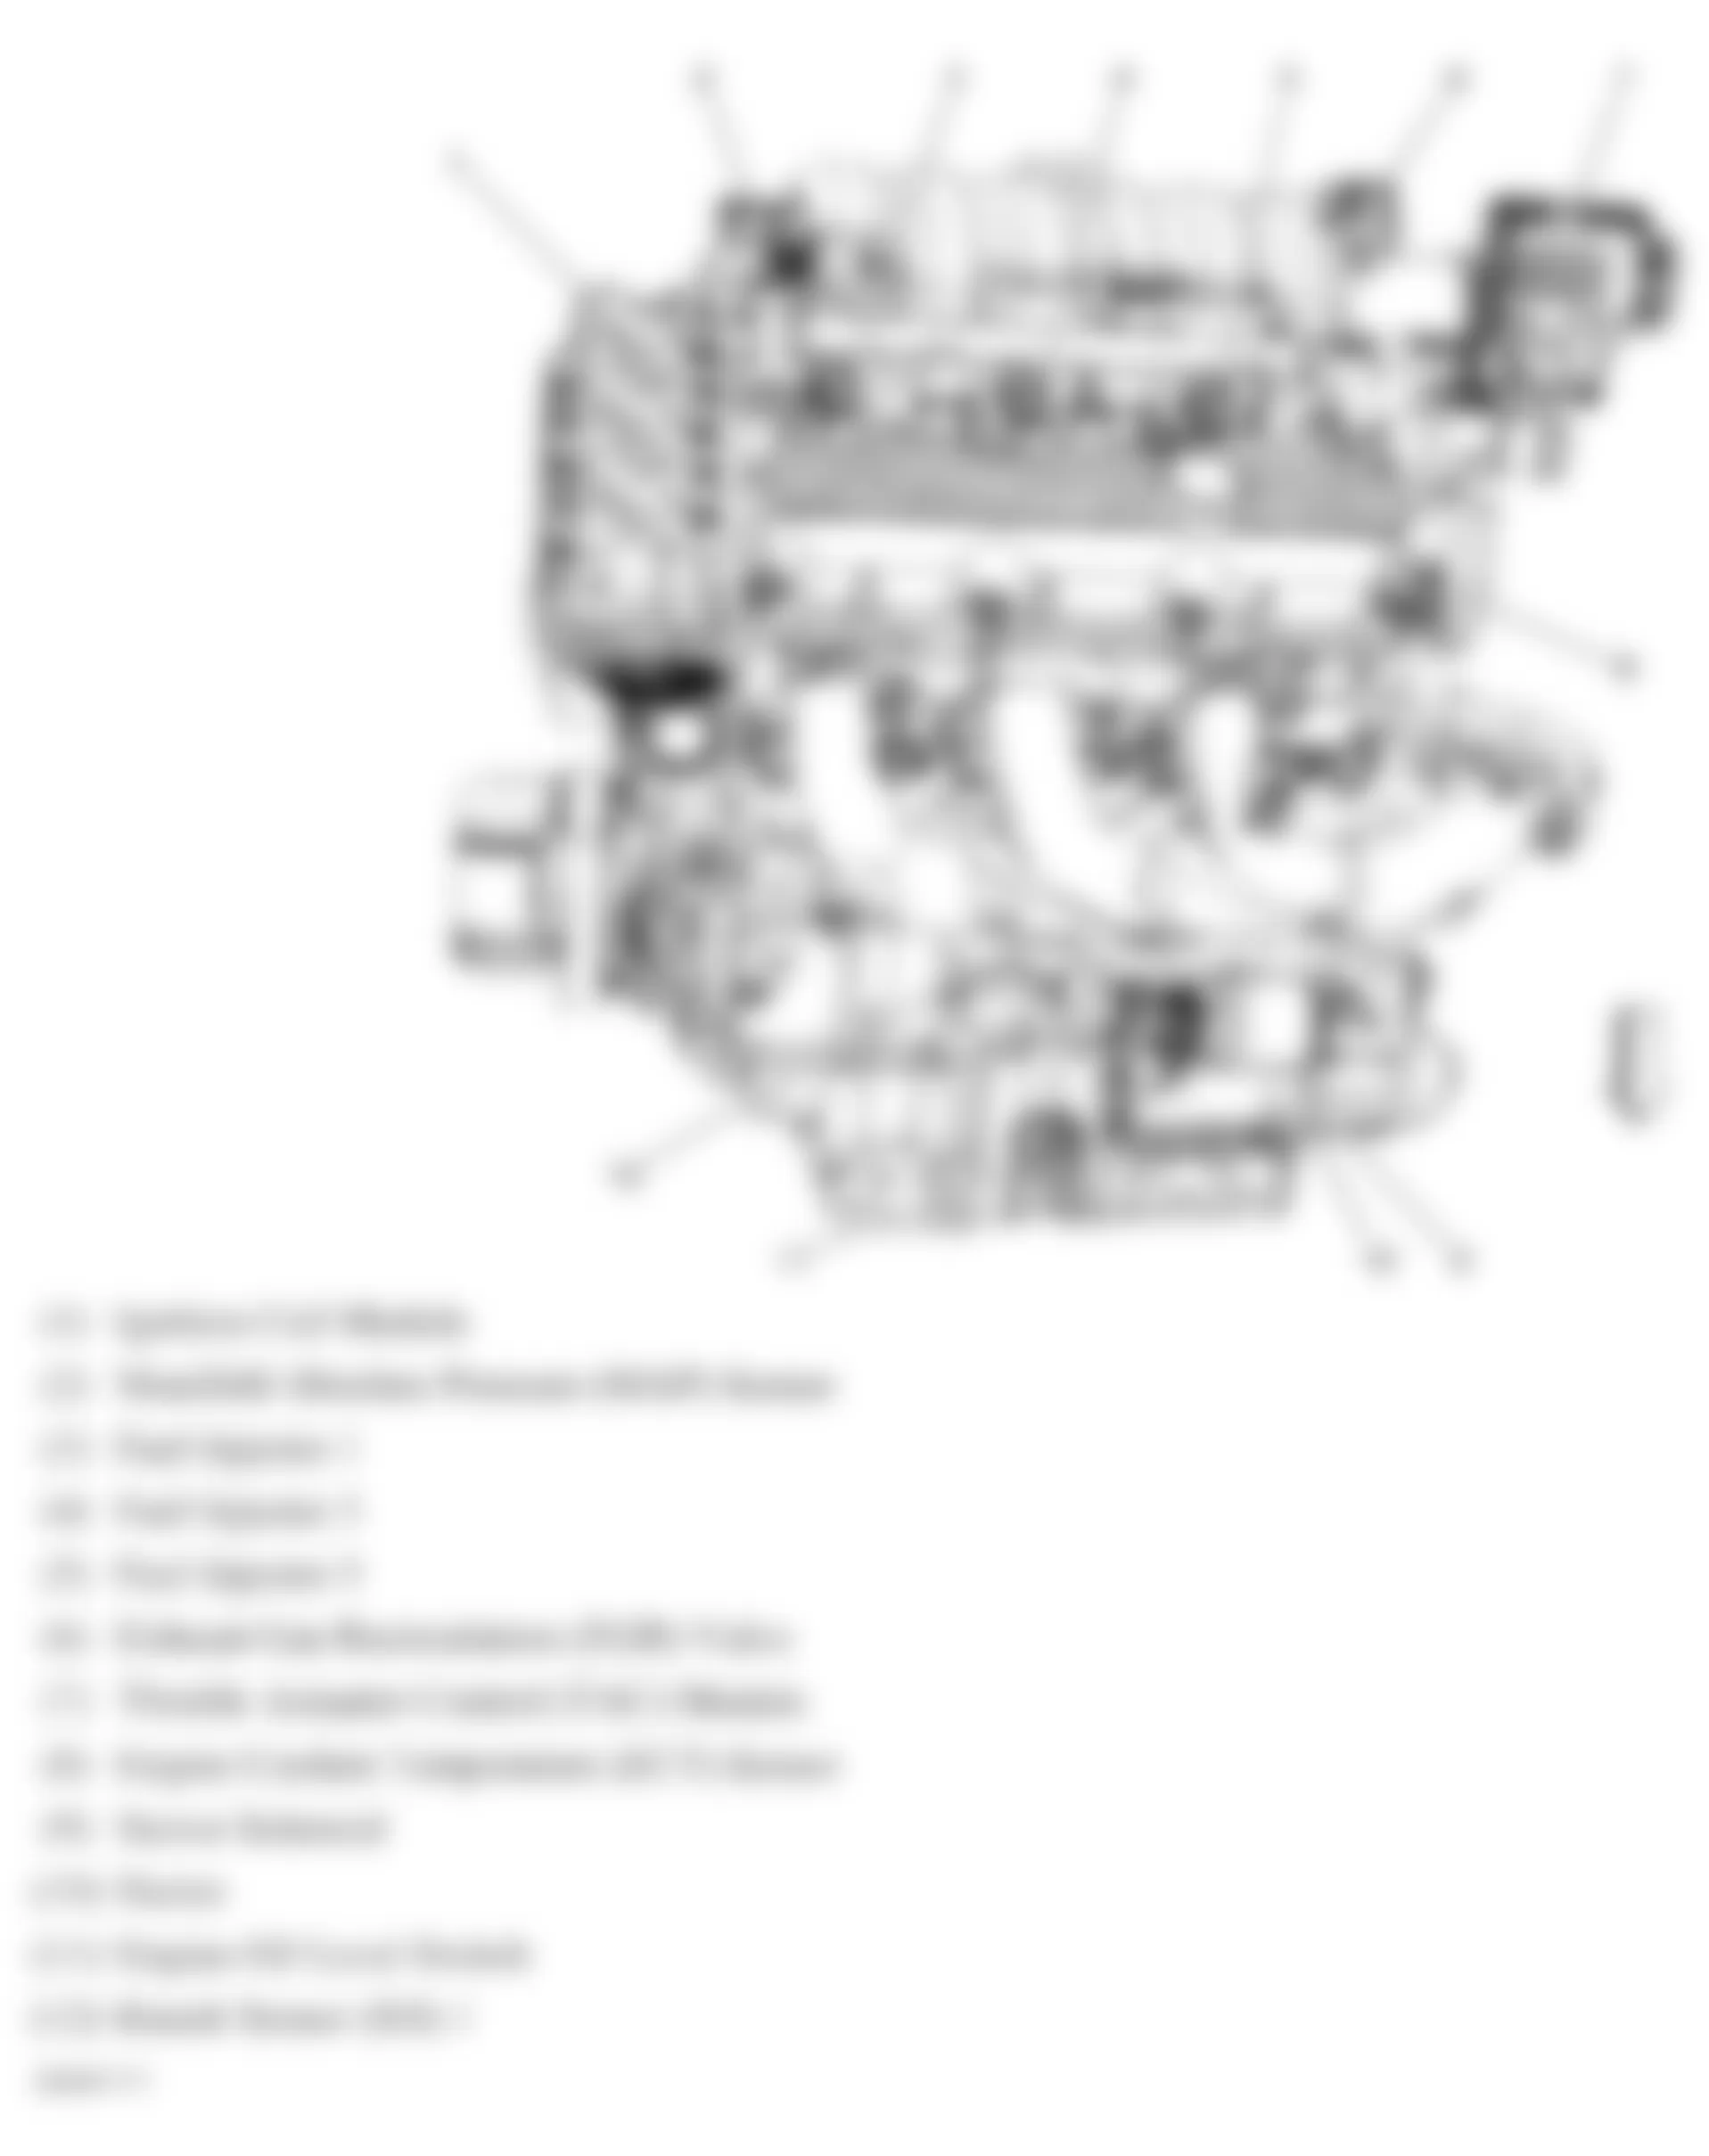 Buick Allure CX 2008 - Component Locations -  Left Side Of Engine (3.8L)